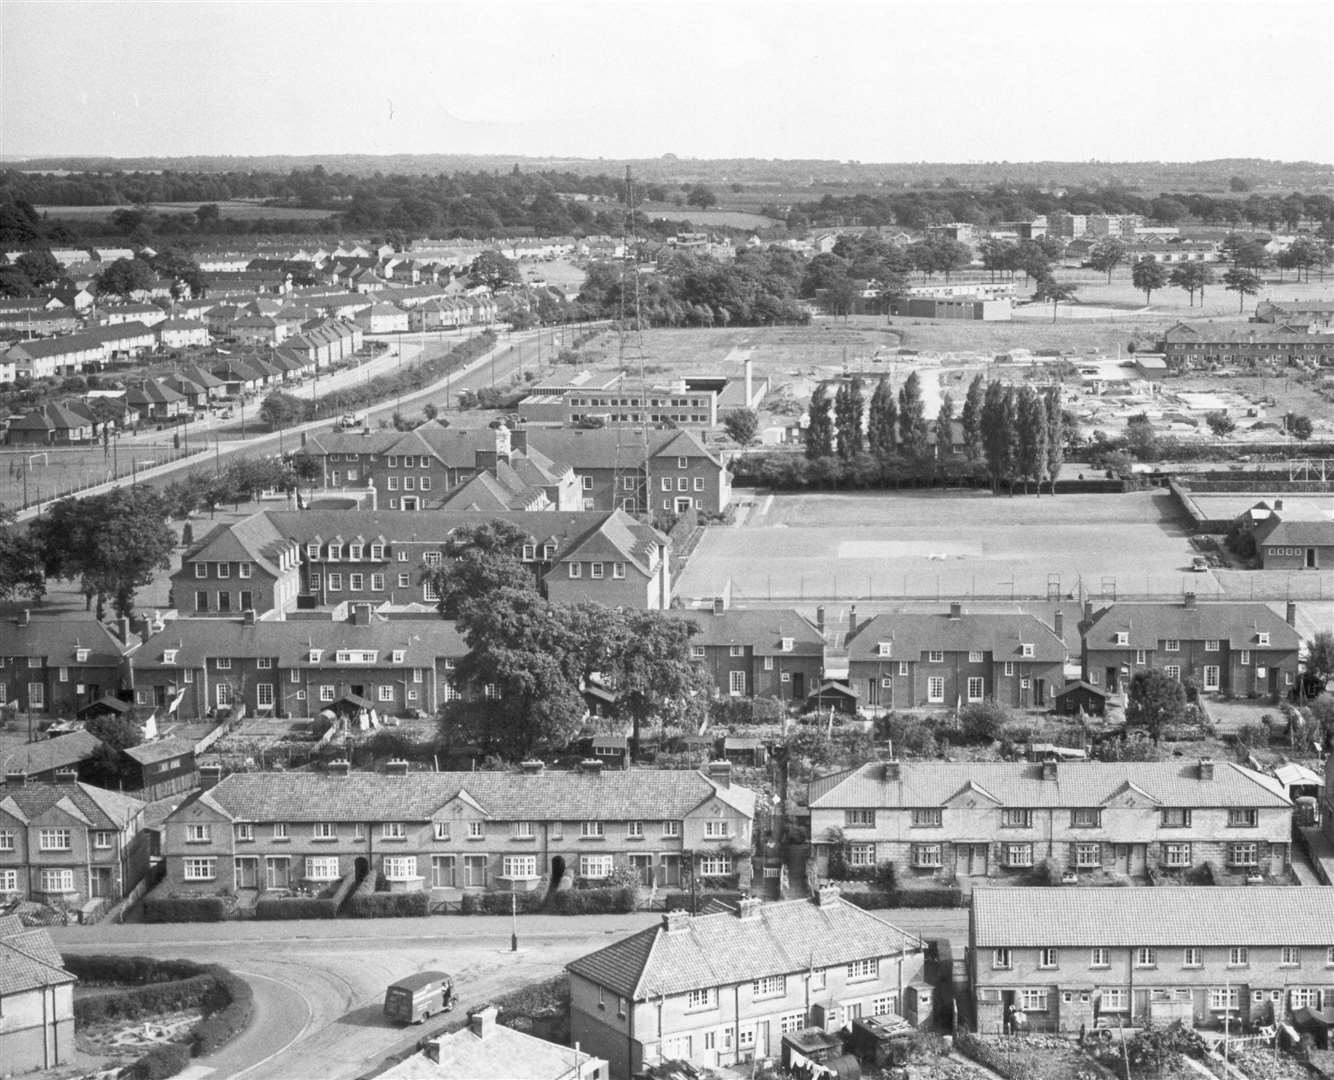 An aerial view of the Sutton Road headquarters in 1959